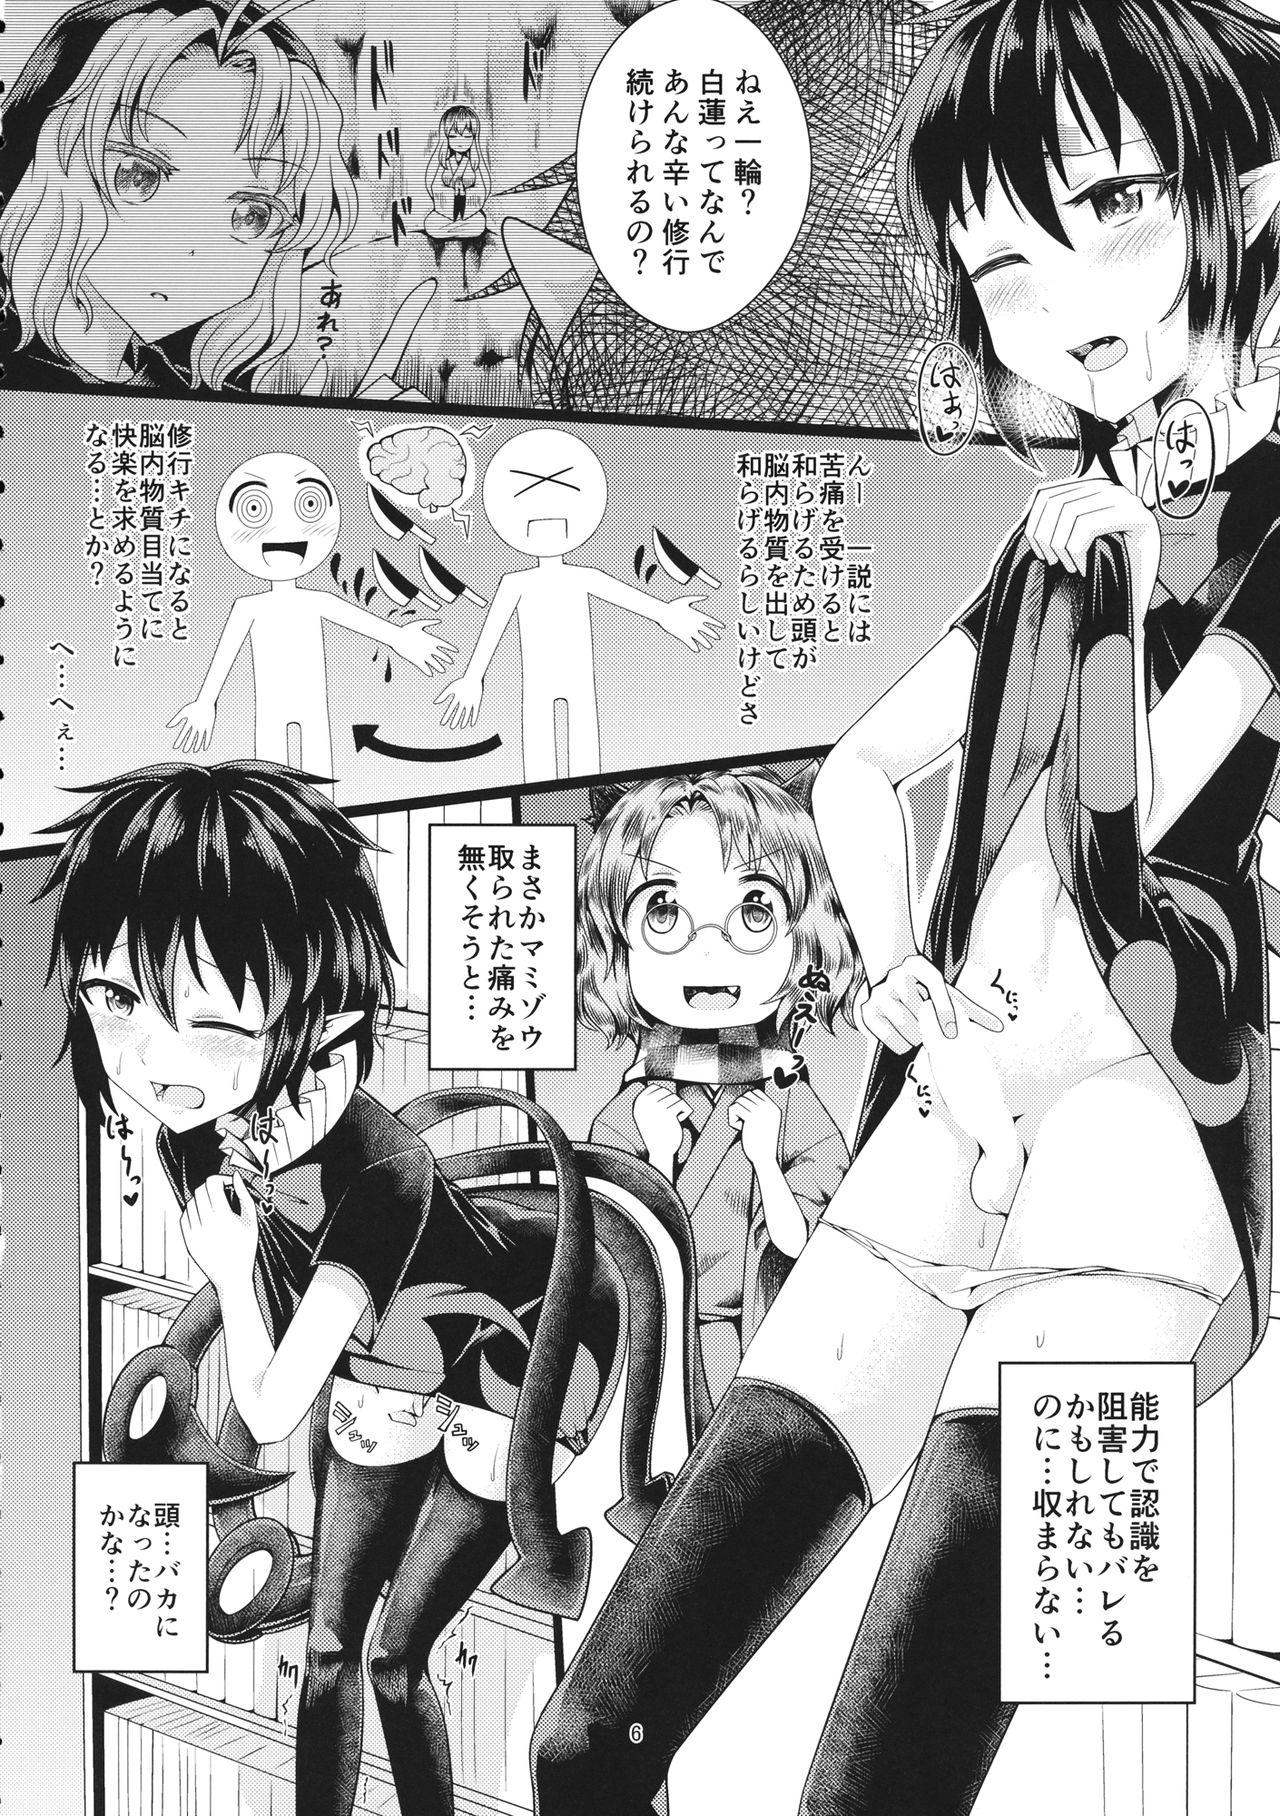 Magrinha Reverse Sexuality 8 - Touhou project Oldvsyoung - Page 5